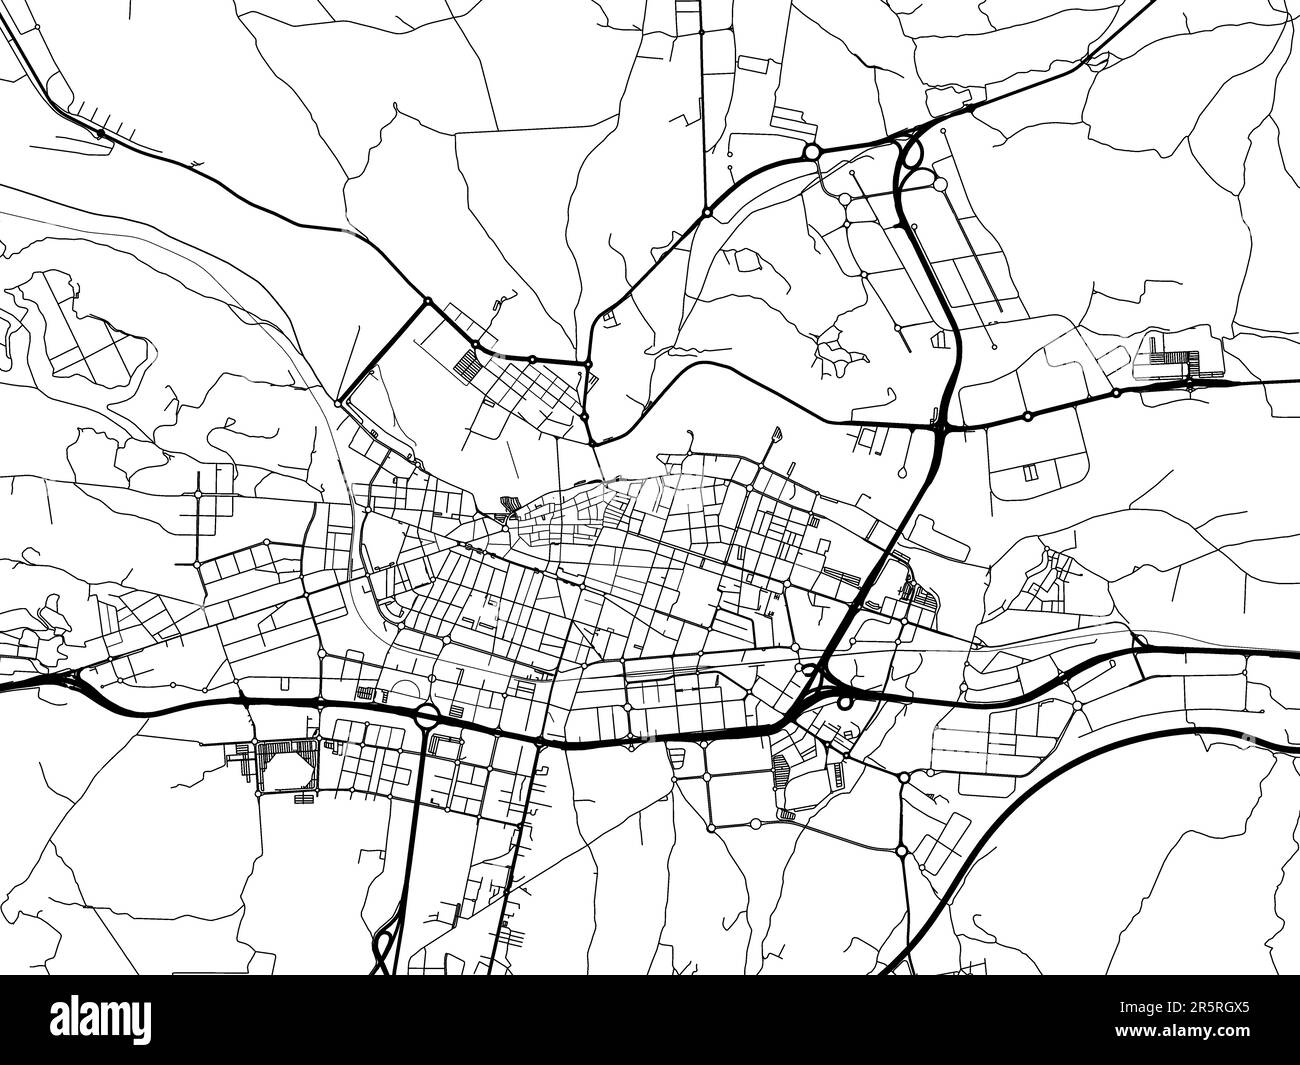 Vector road map of the city of Logrono in Spain on a white background ...